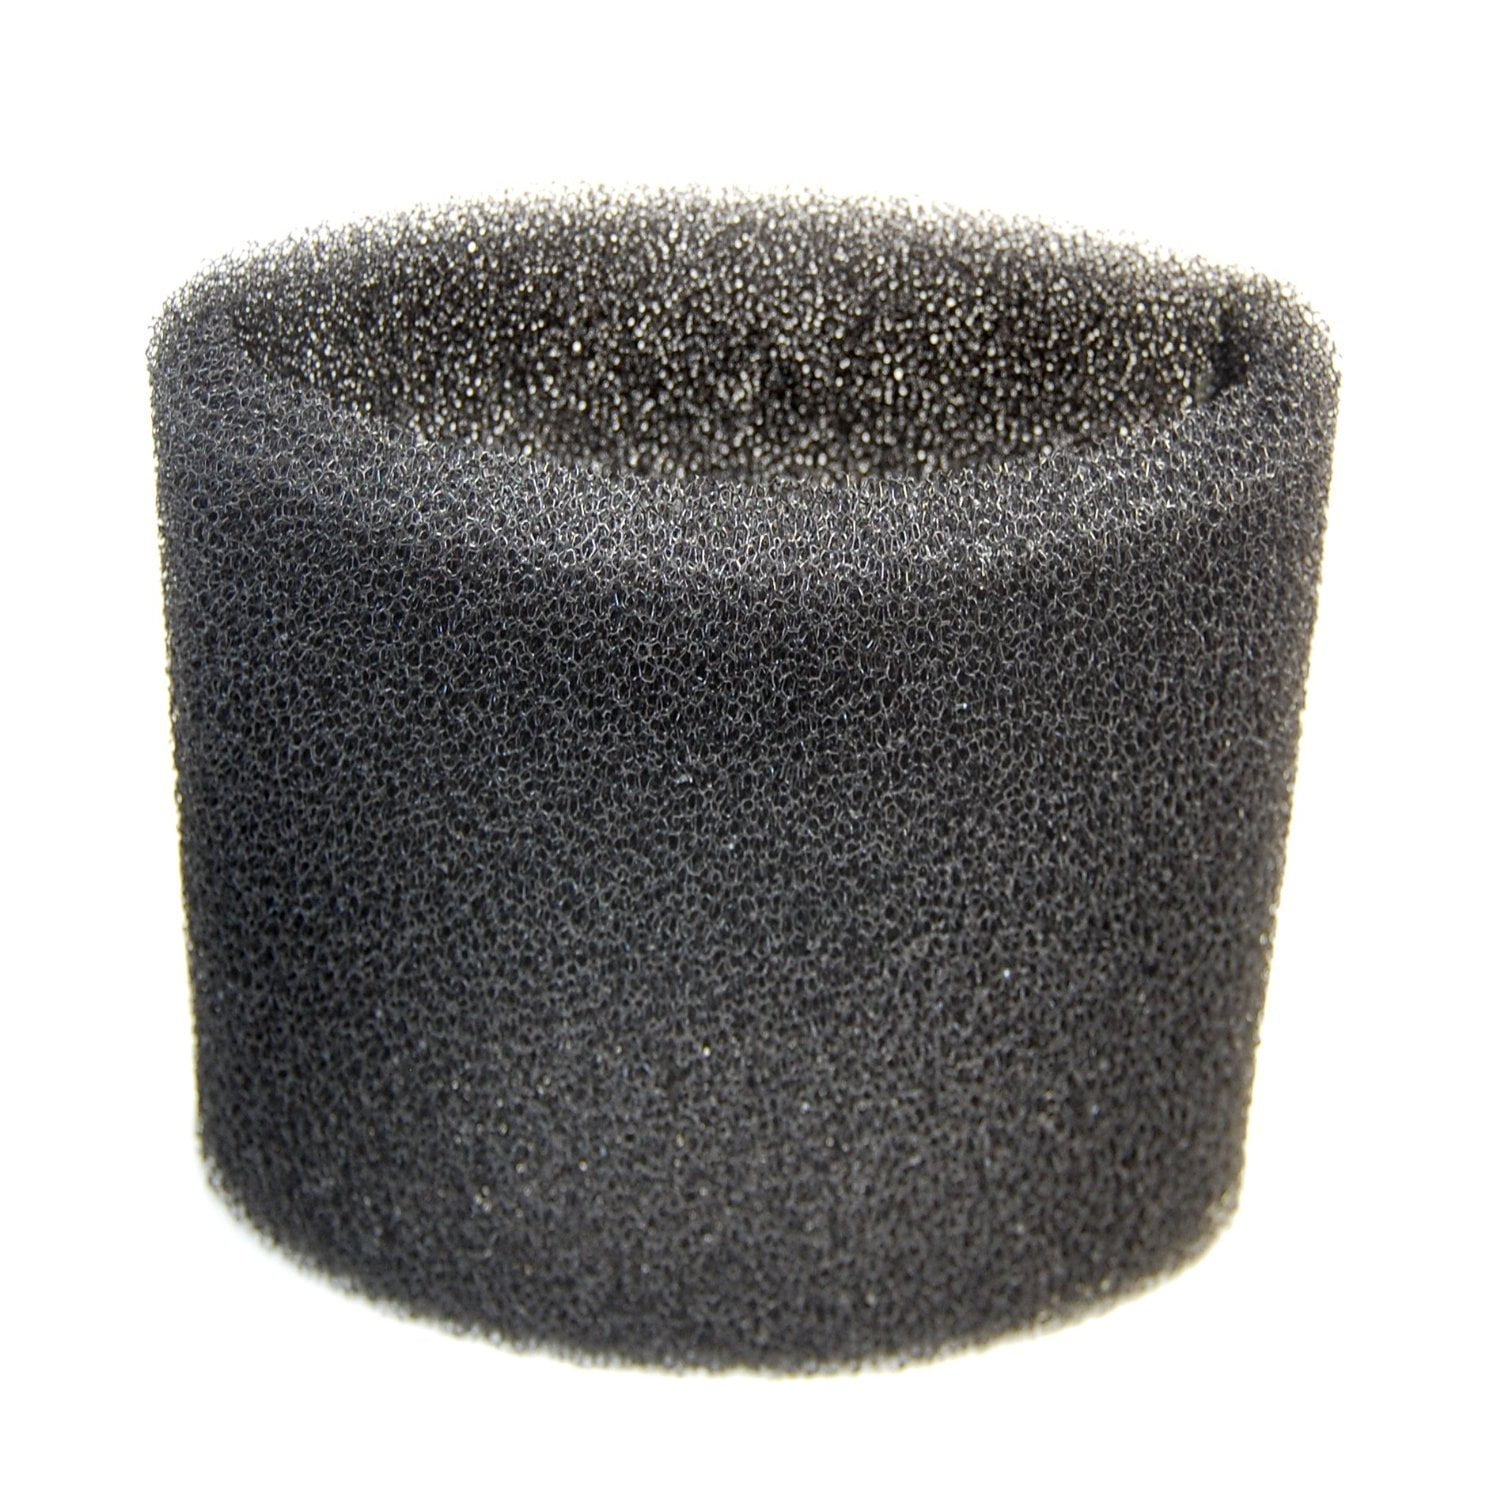 Details about   Foam Sleeve Vacuum Filter Compatible with ShopVac 90304 and 9058500 